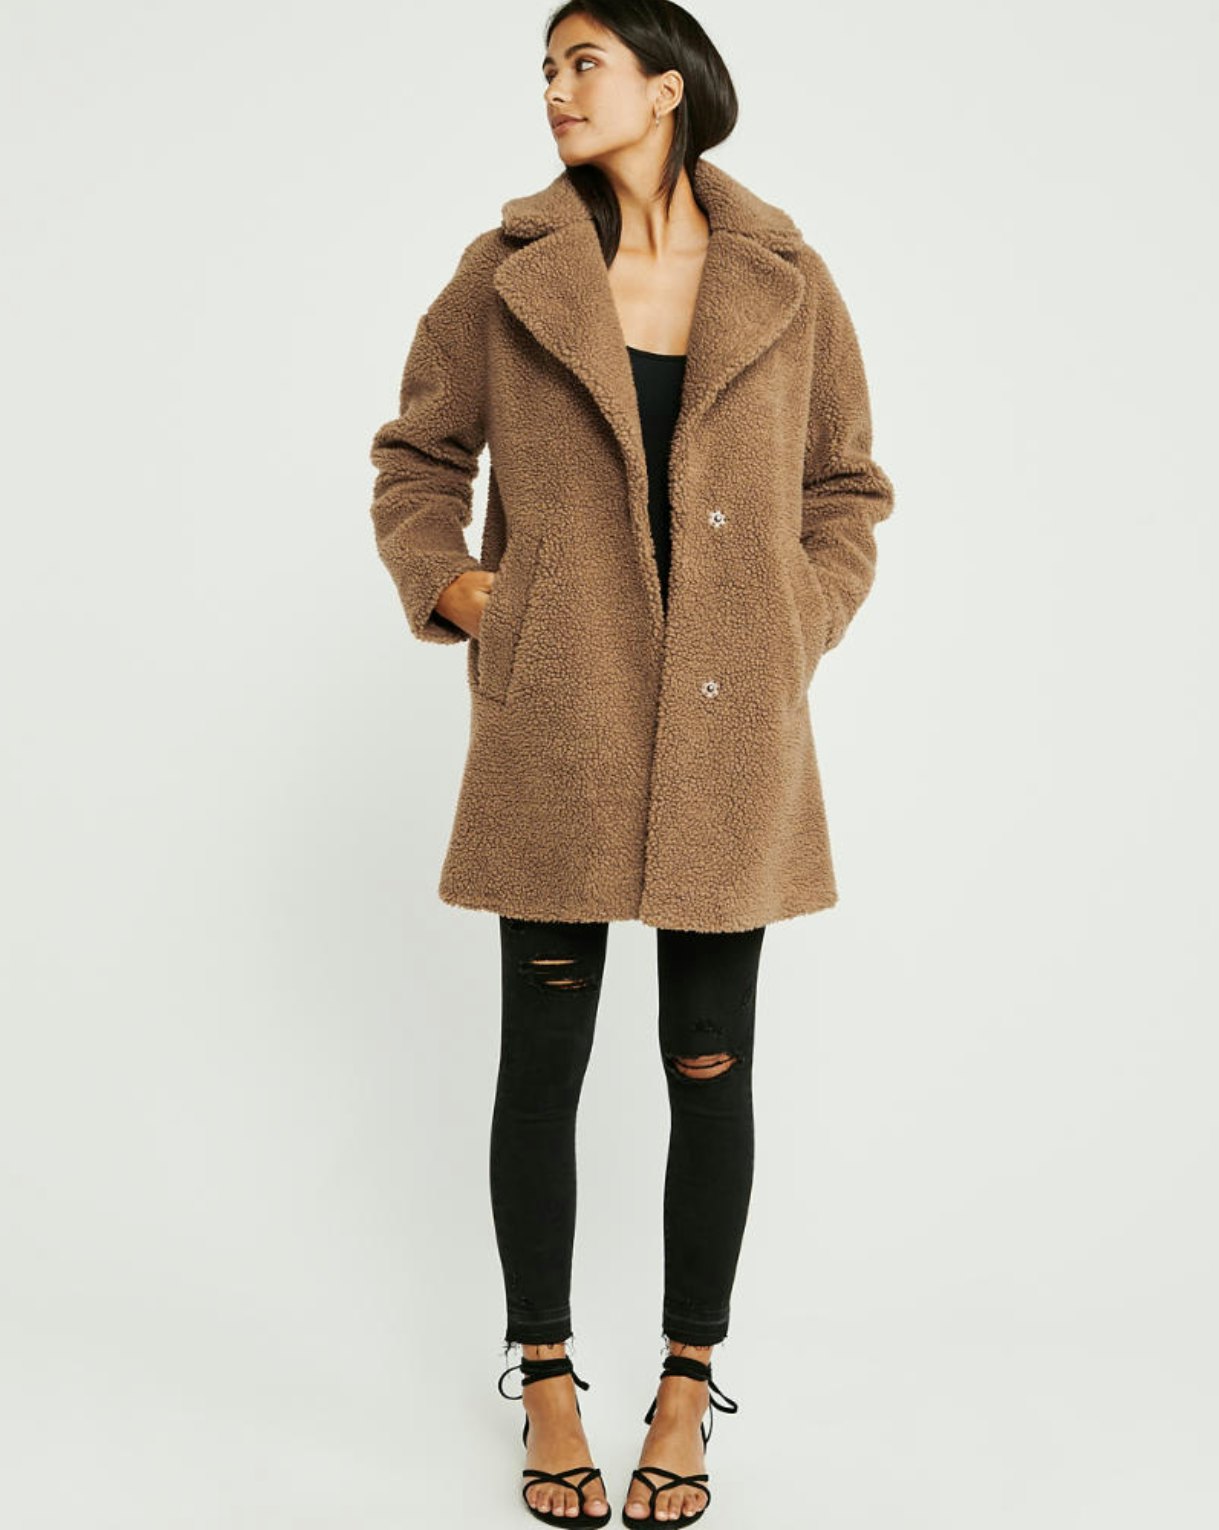 abercrombie and fitch teddy coat